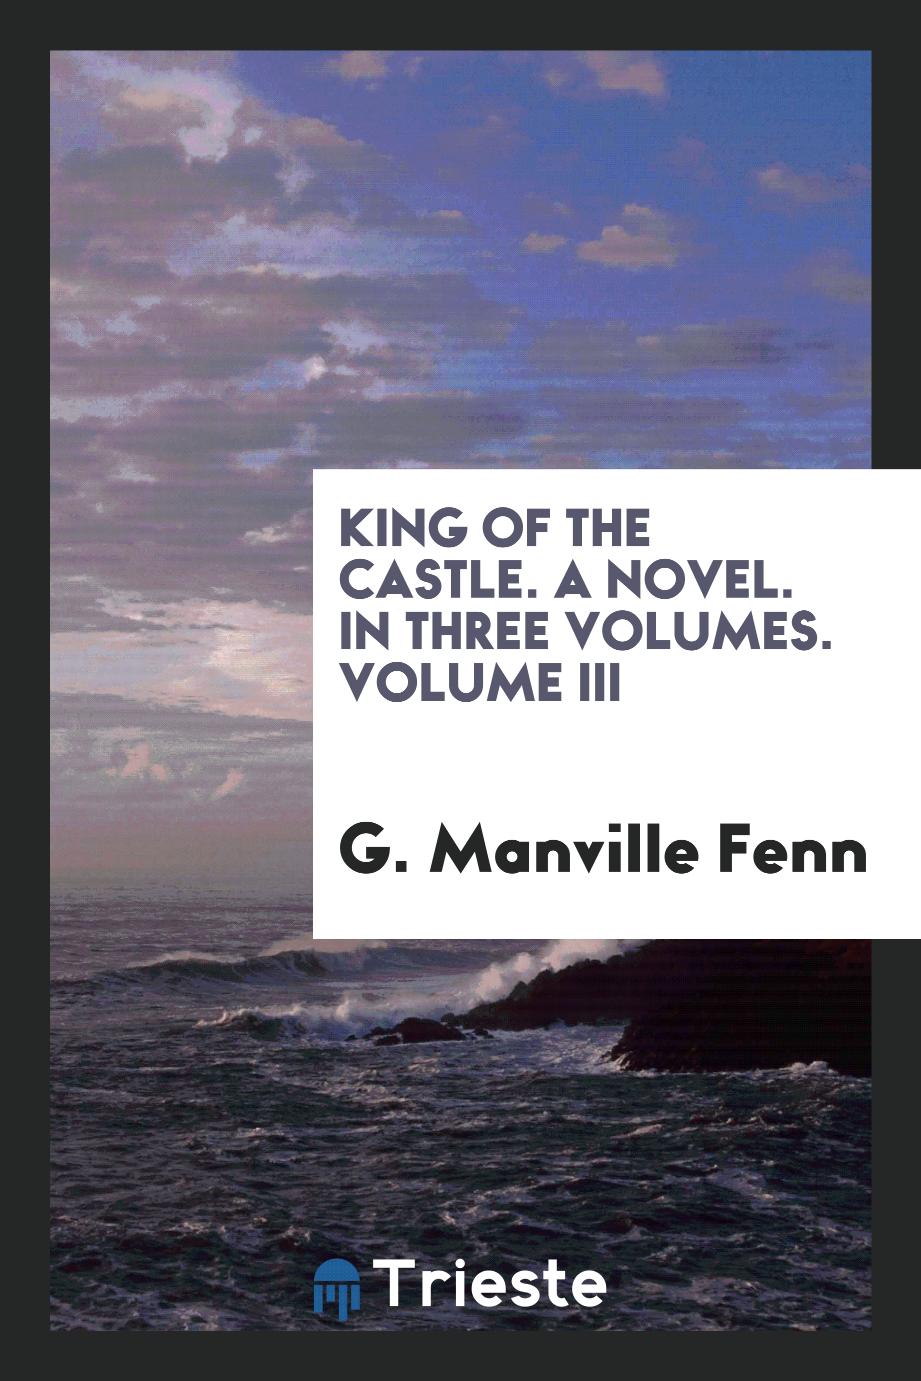 King of the castle. A novel. In three volumes. Volume III